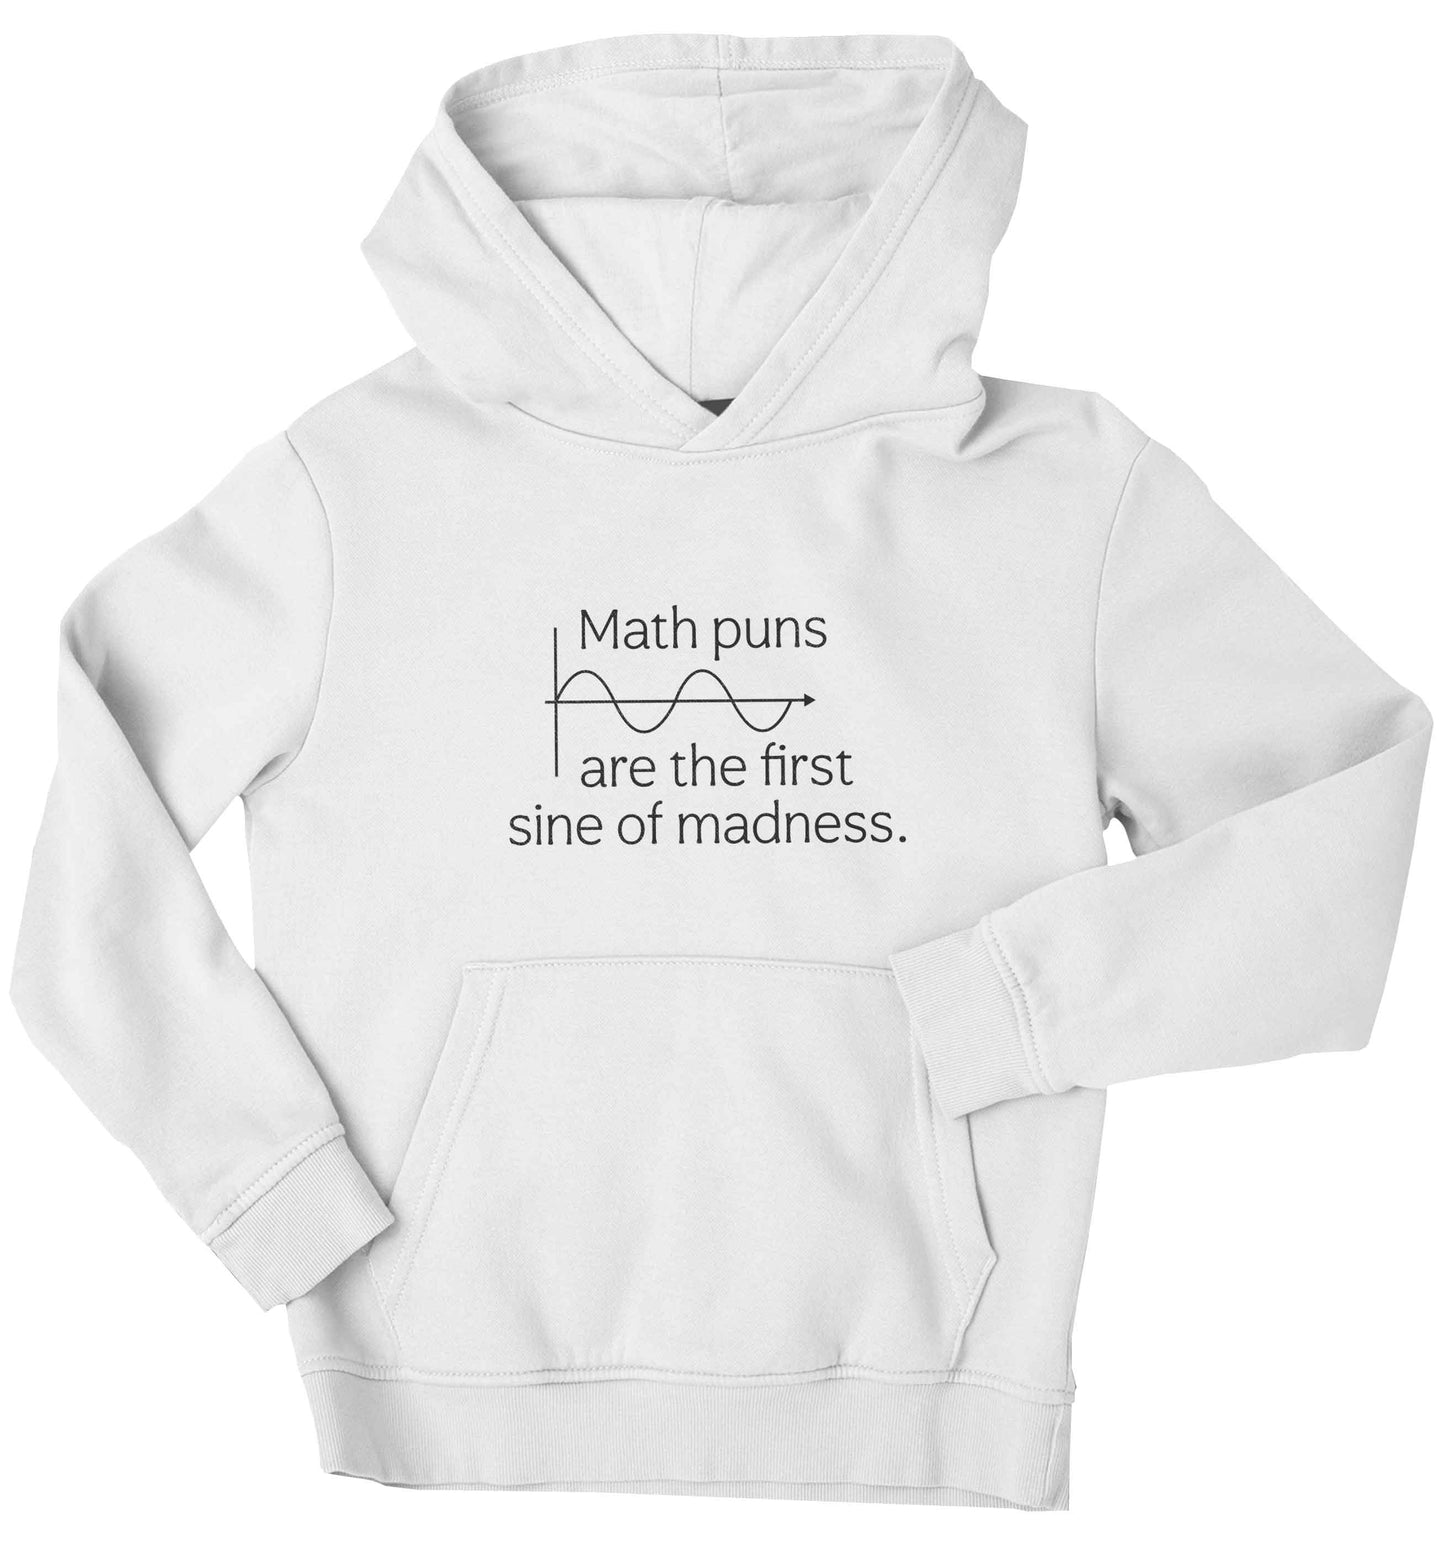 Math puns are the first sine of madness children's white hoodie 12-13 Years